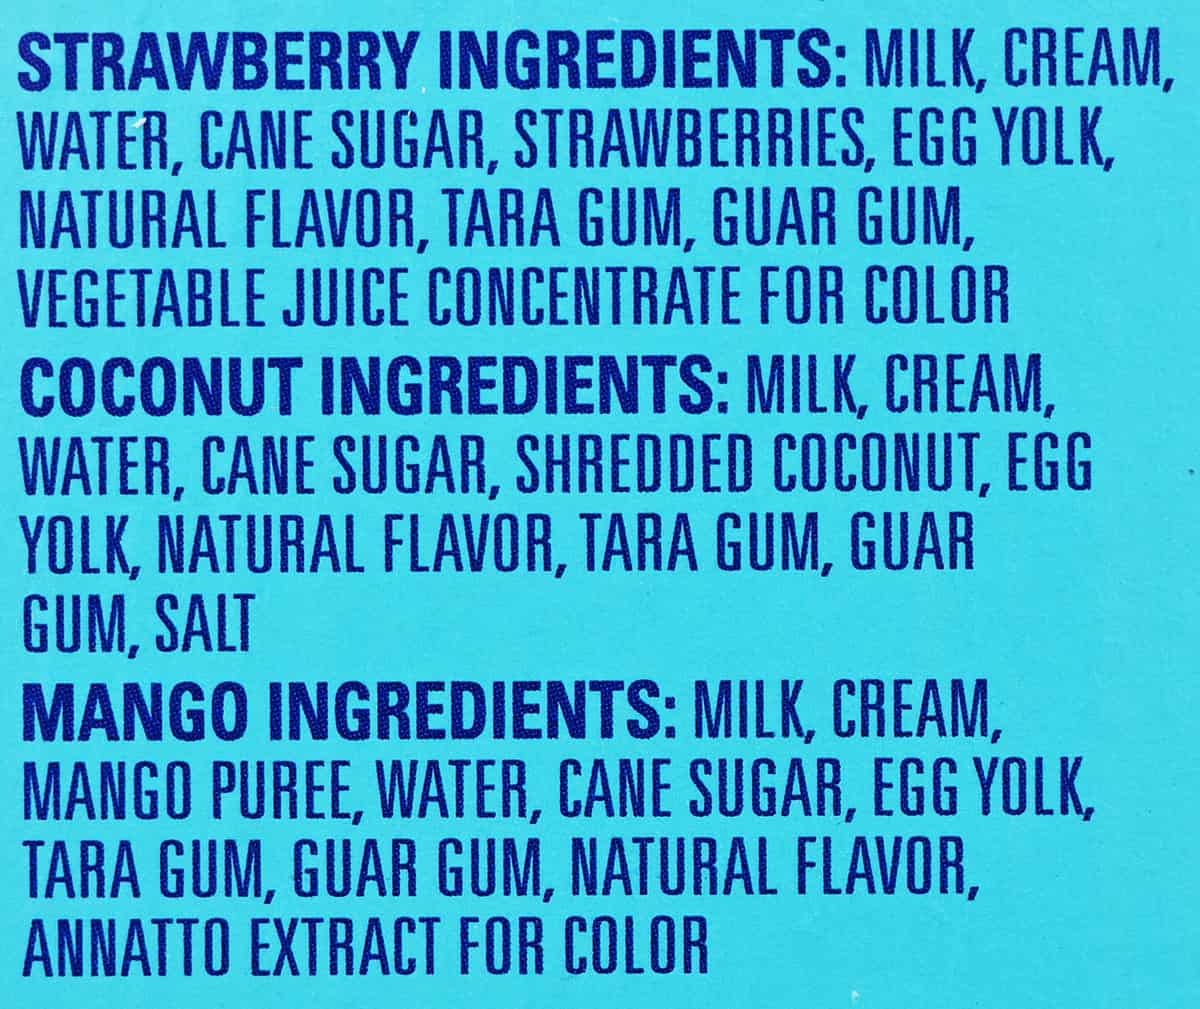 Image of the ingredients list for the bars from the box.